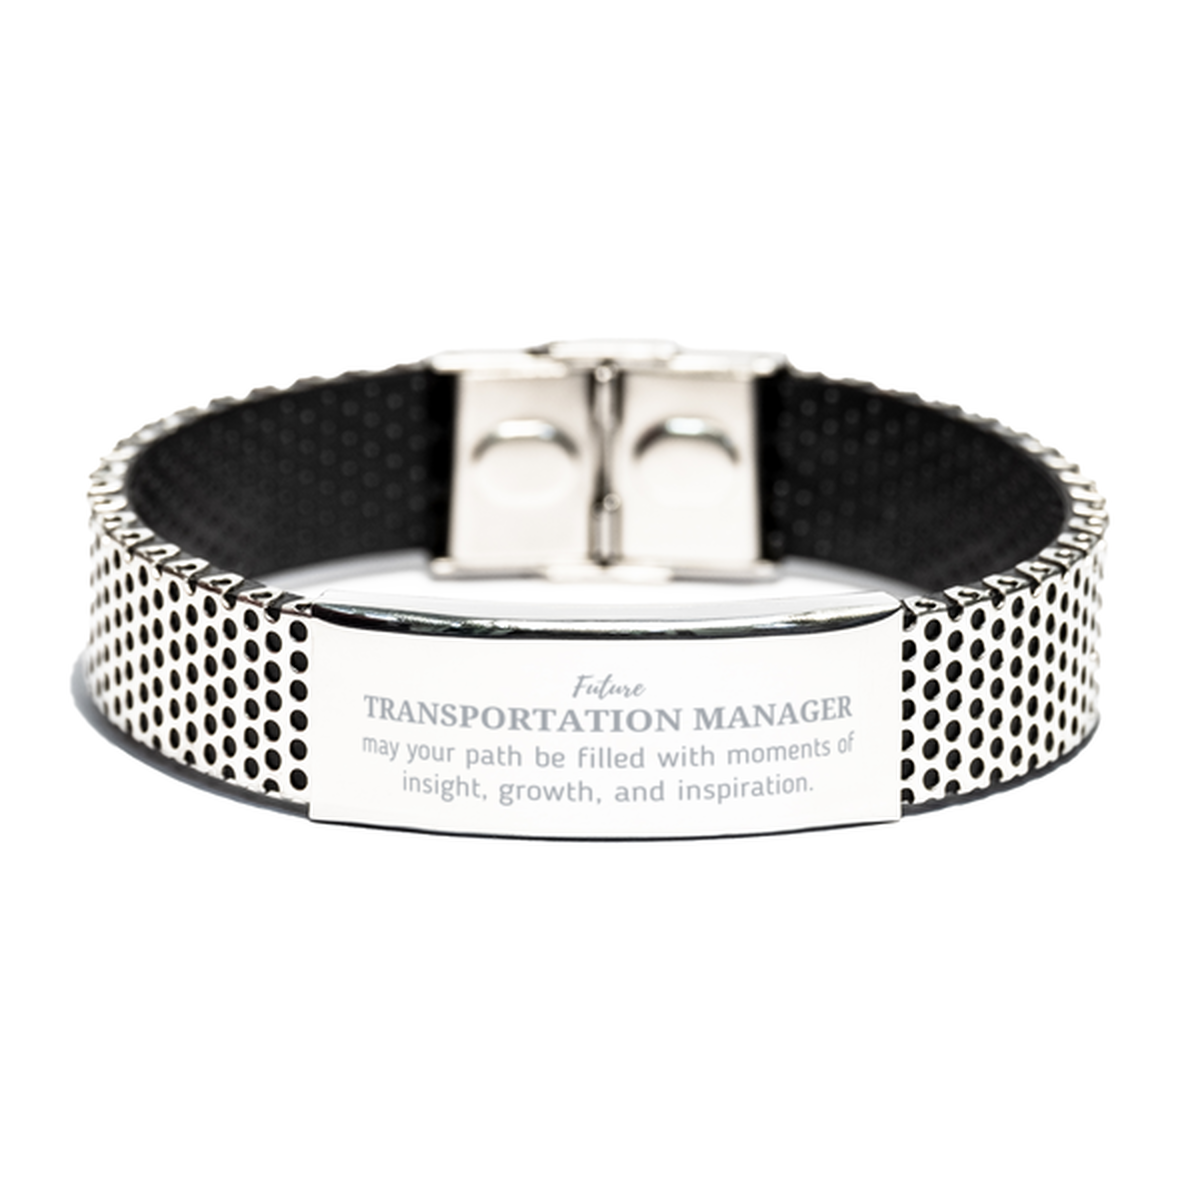 Future Transportation Manager Gifts, May your path be filled with moments of insight, Graduation Gifts for New Transportation Manager, Christmas Unique Stainless Steel Bracelet For Men, Women, Friends